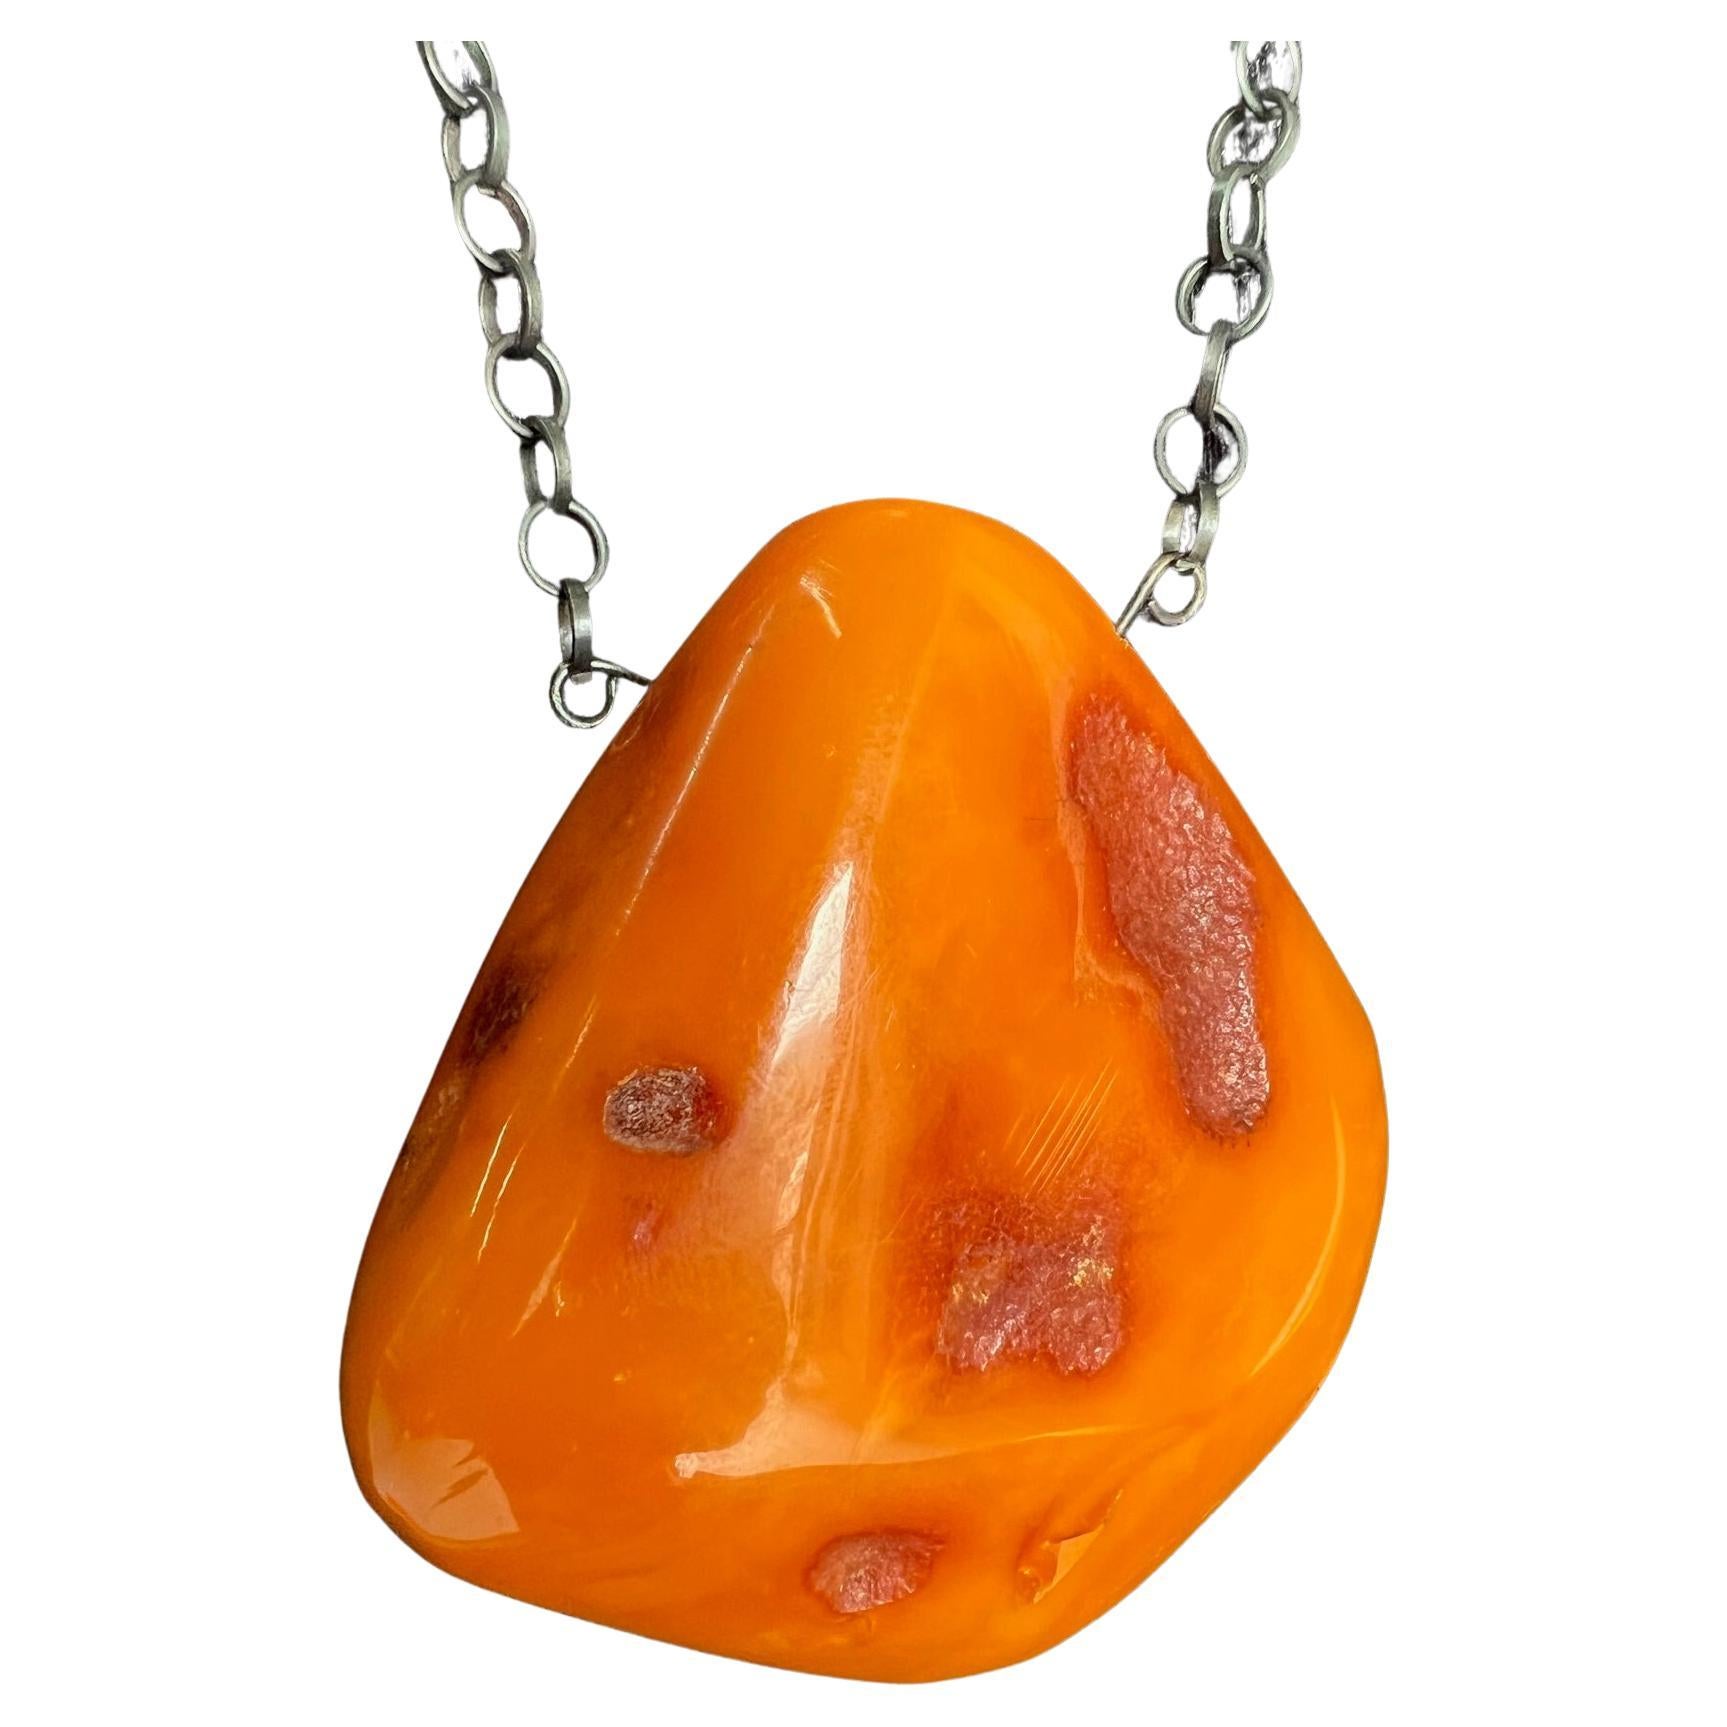 how much is an amber necklace worth